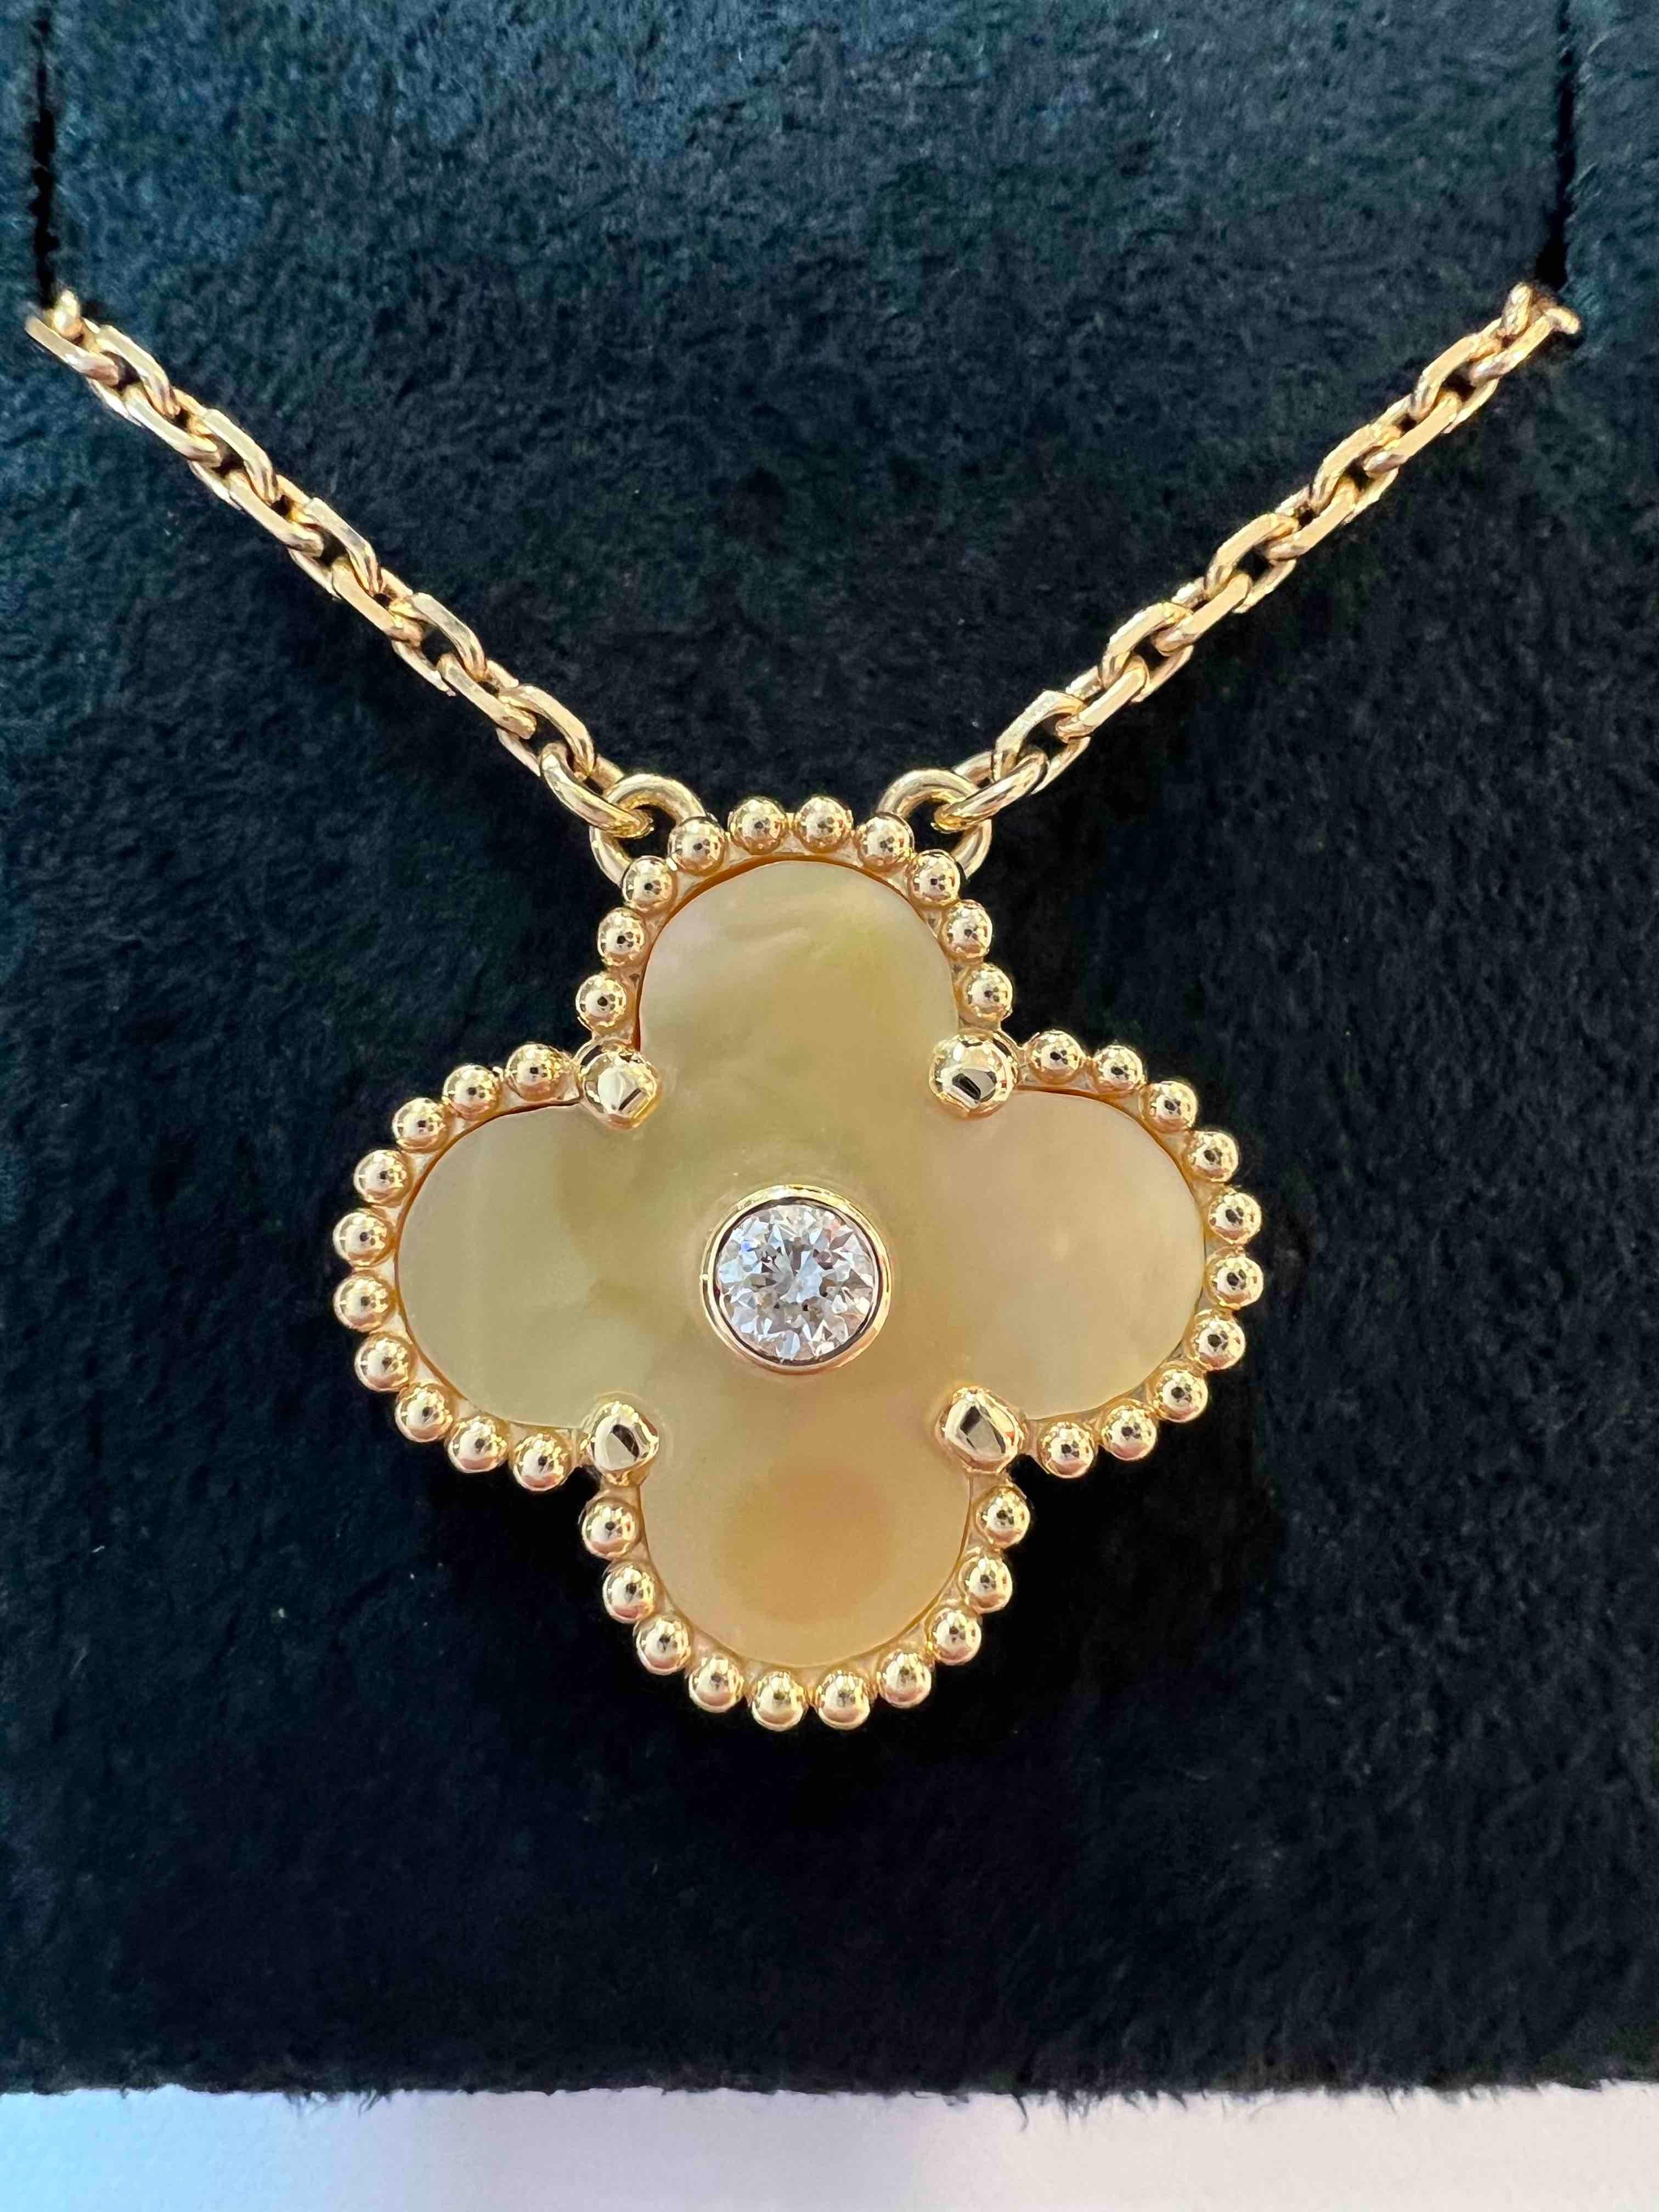 Van Cleef & Arpels 2018 Holiday Pendant of Vintage Alhambra, diamond, gold mother of pearl necklace. Discontinued hard to get on the market. 

Maker: Van Cleef & Arpels

Accessories: Boxes, the original certificate dated 2018, and the